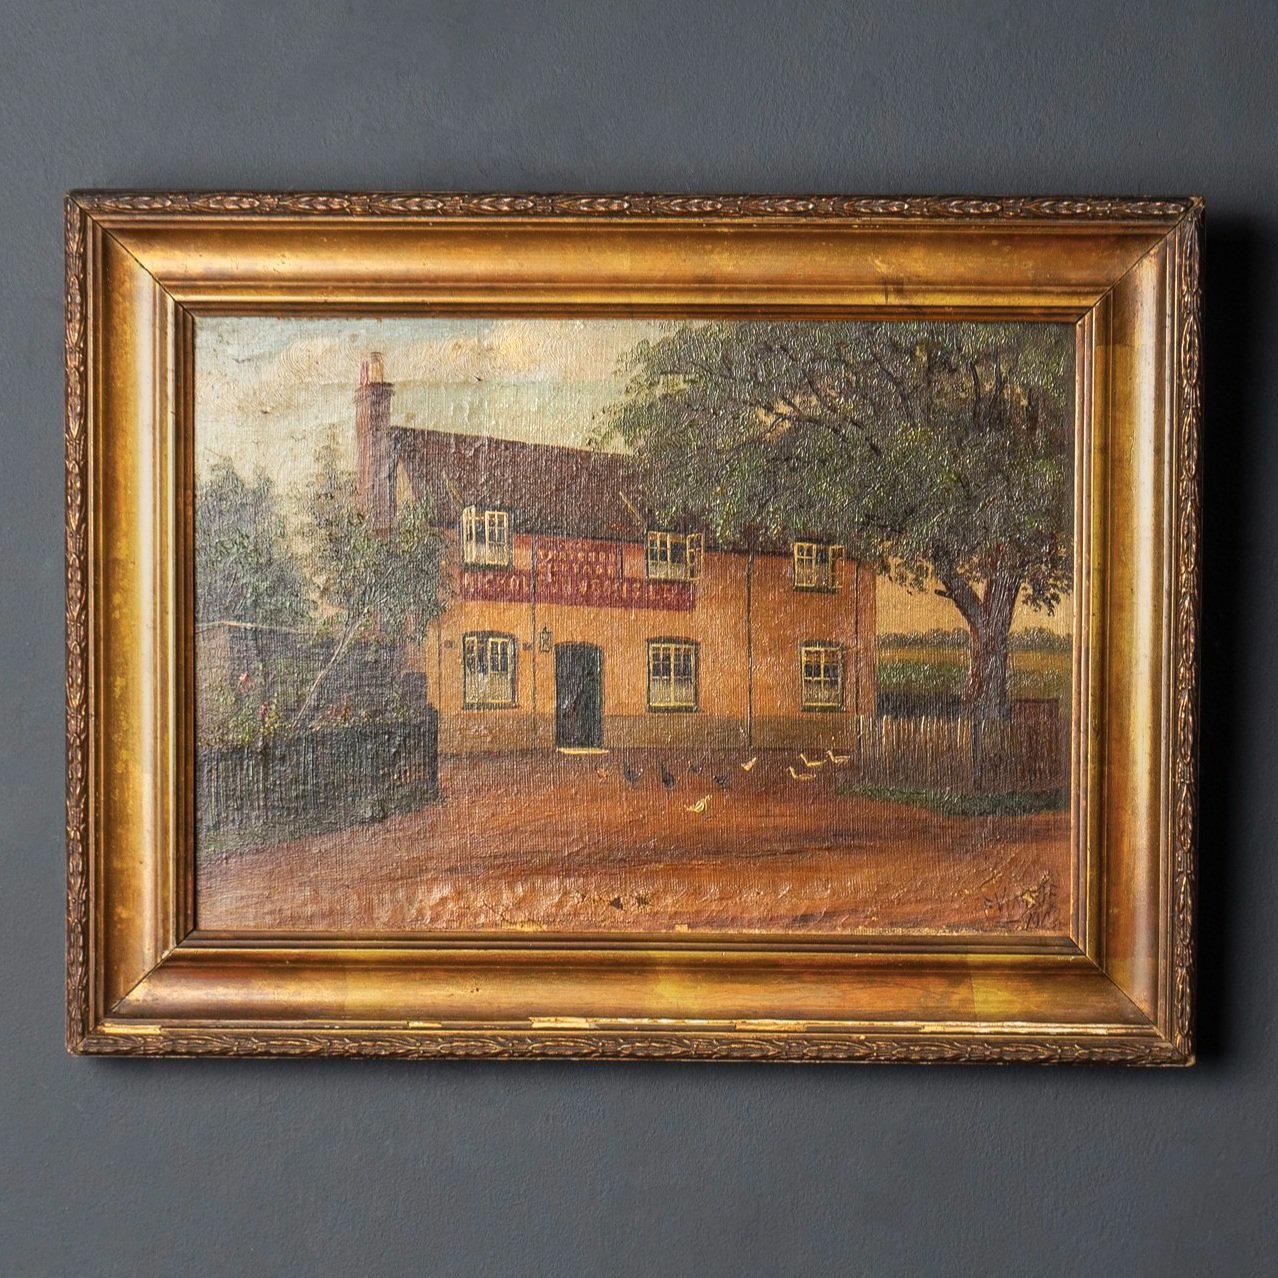 Antique Edwardian Original Oil on Canvas Folk Art Painting Depicting The Thatched Cottage, Maidenhead,

by Francis Vingoe (1879-1940)

Vingoe used to travel around door to door showing examples of his work and asking people if they would like him to